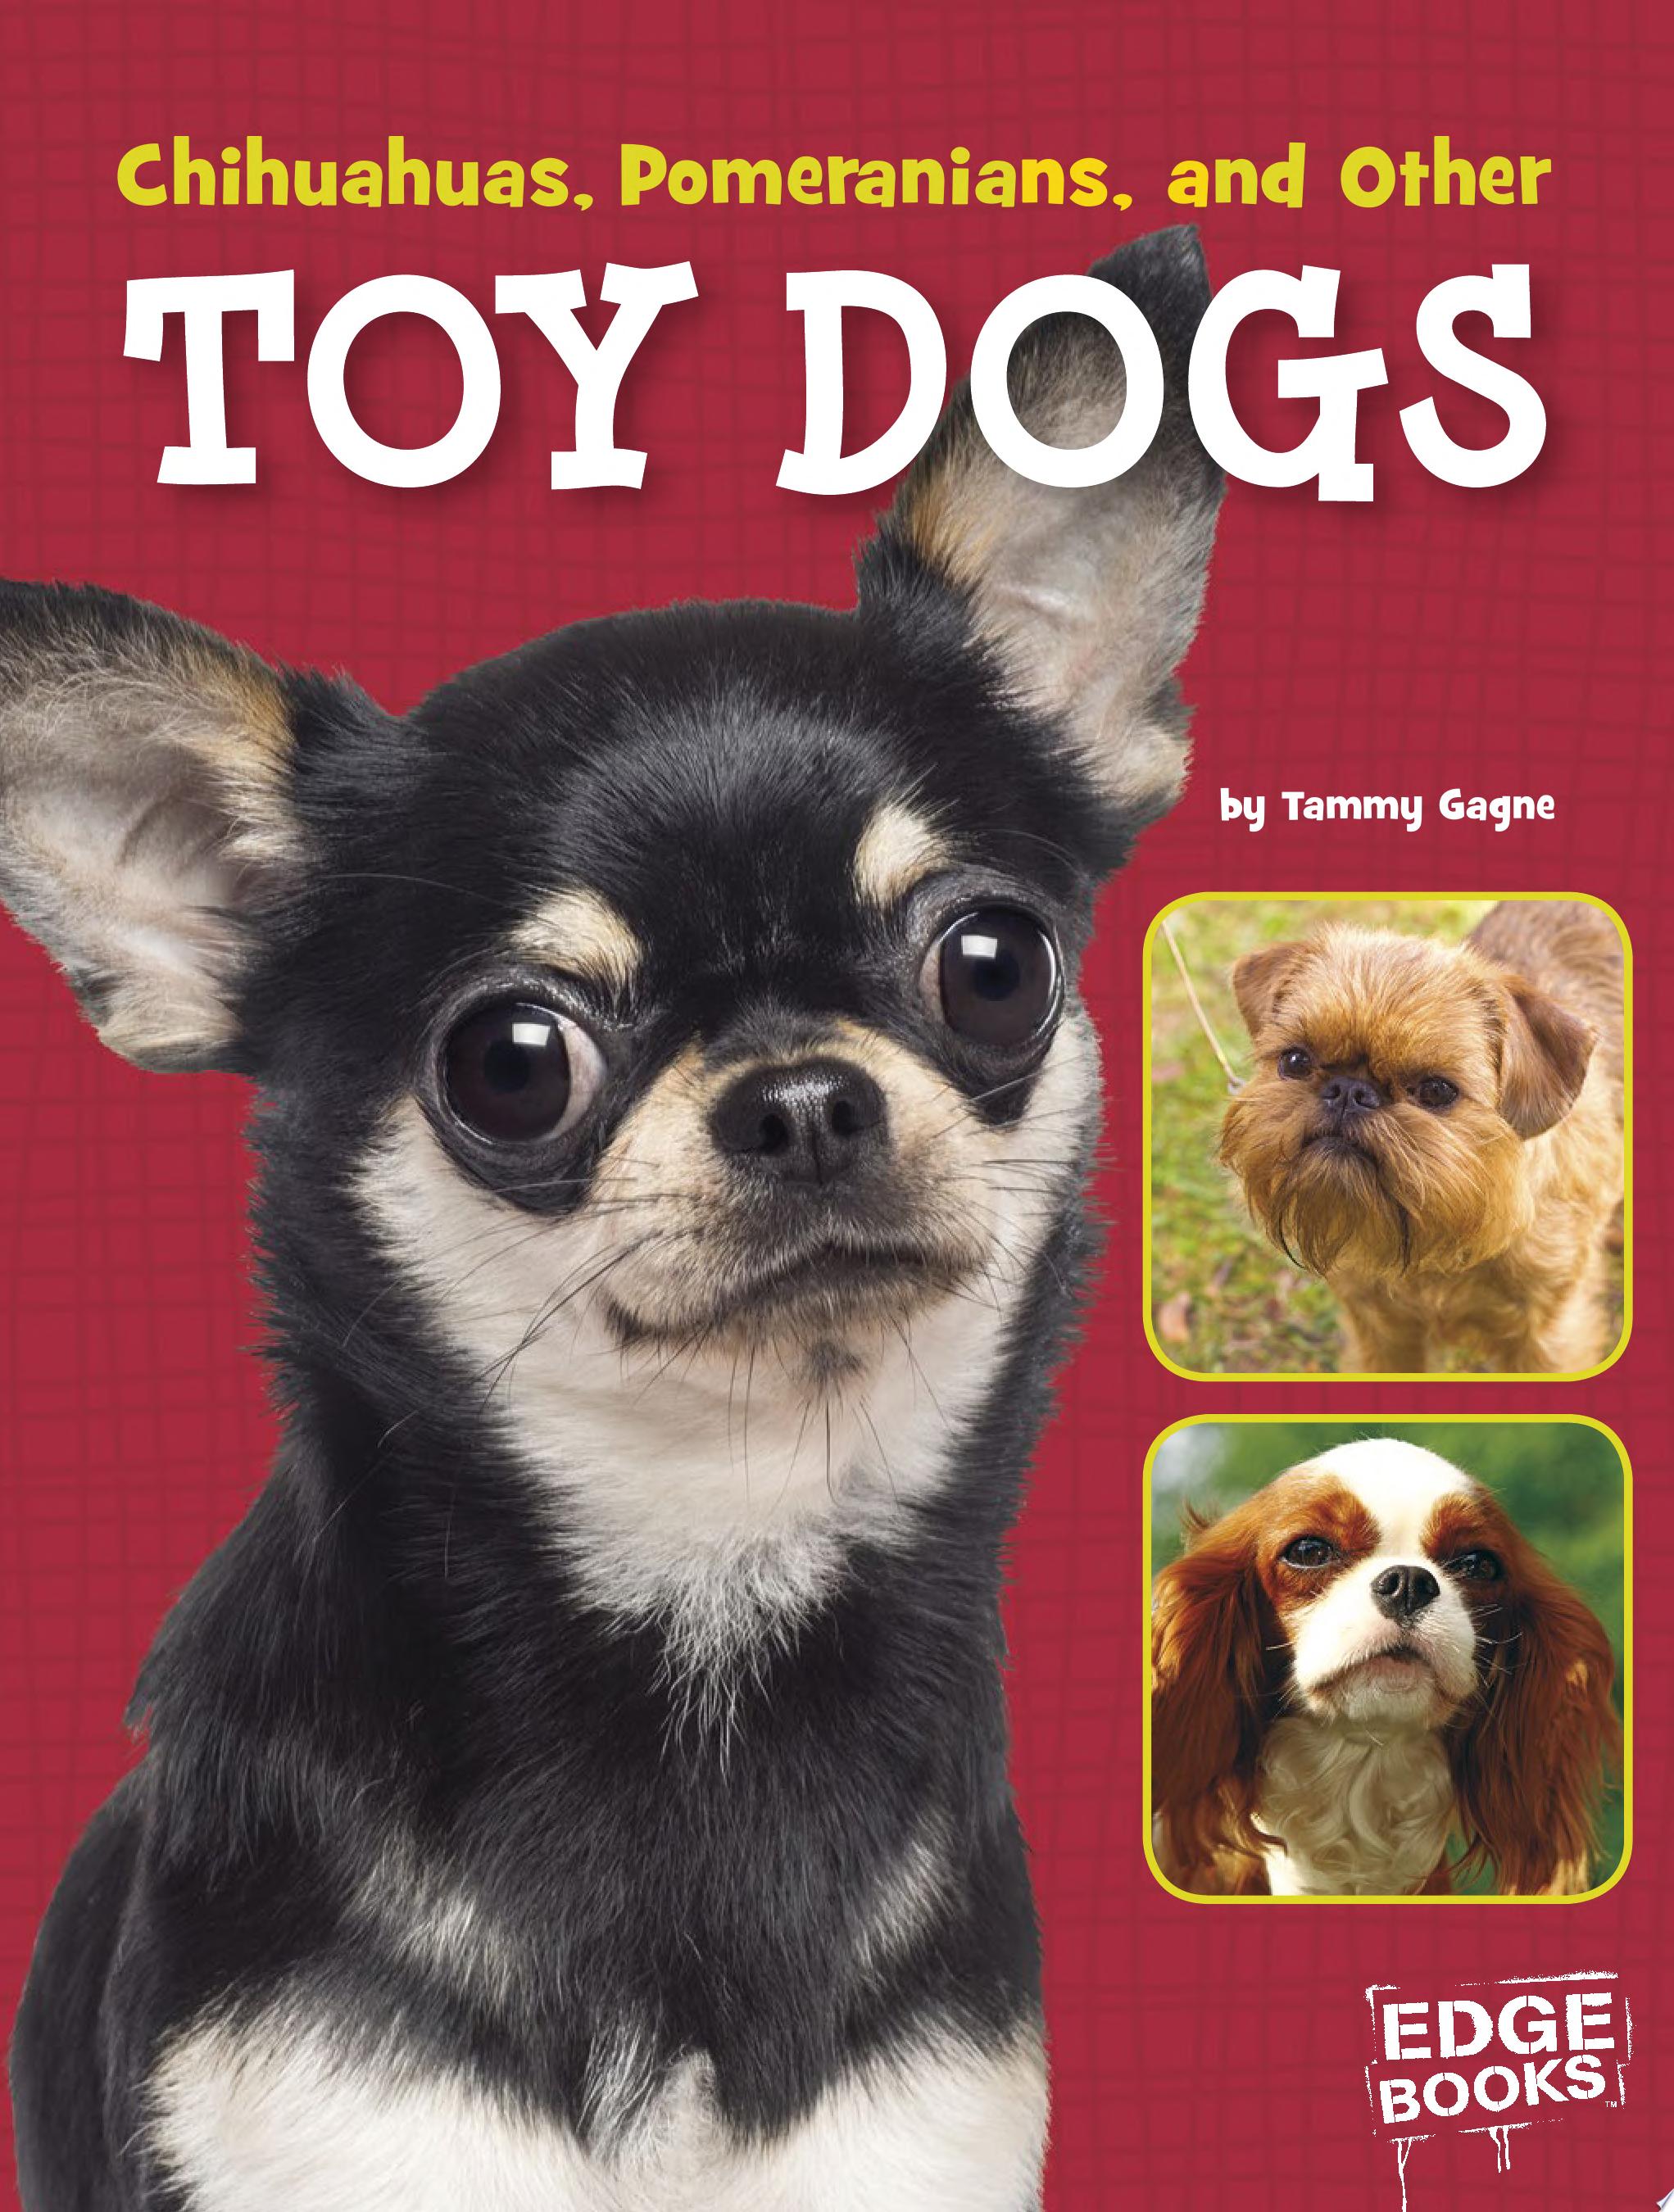 Image for "Chihuahuas, Pomeranians, and Other Toy Dogs"